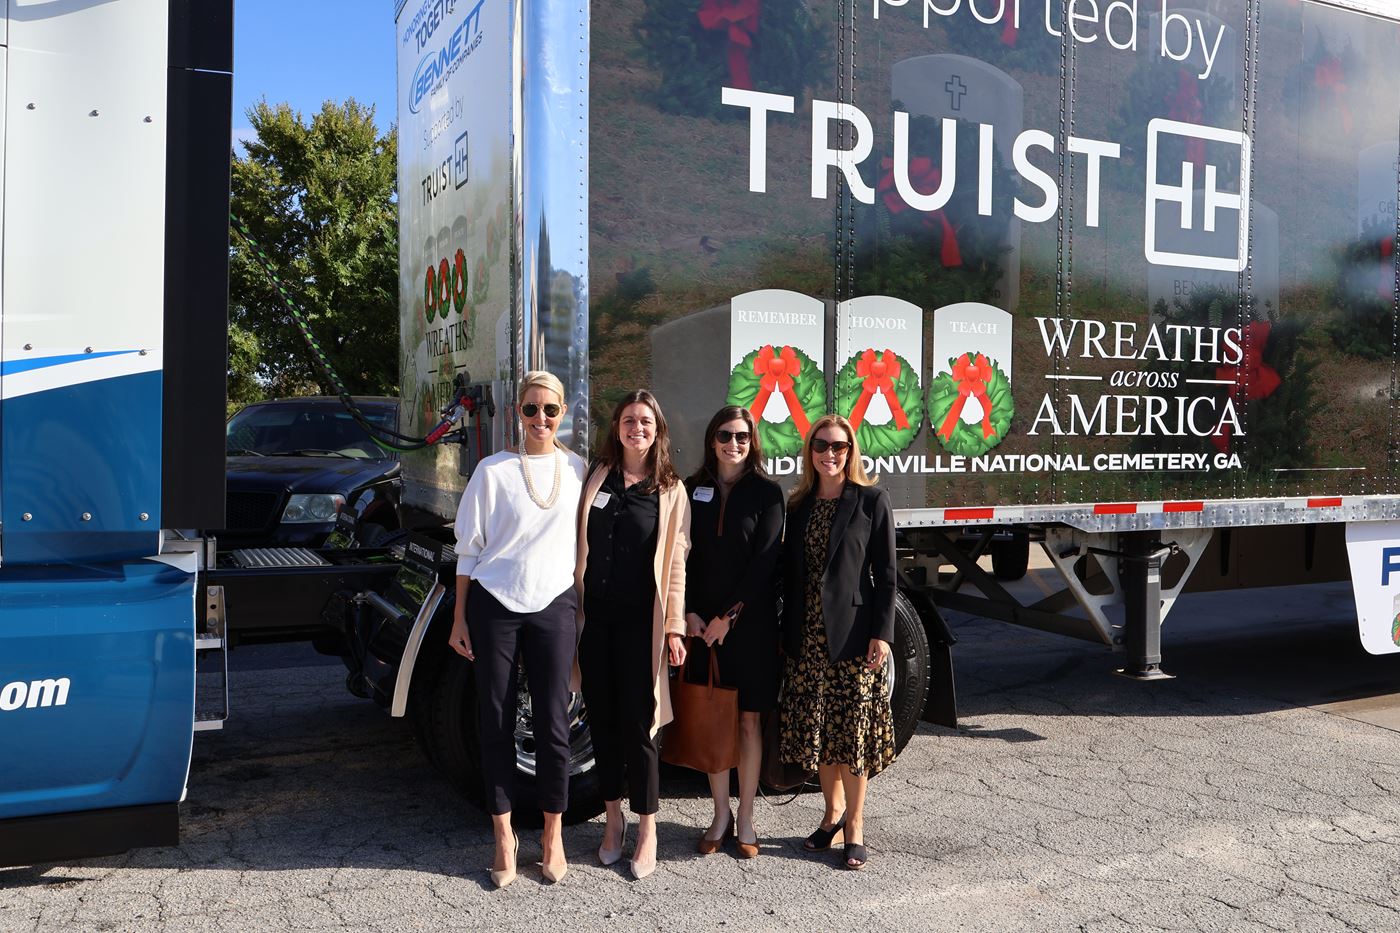 Members of Truist Stand in Front of New Trailer to Support Wreaths Across America